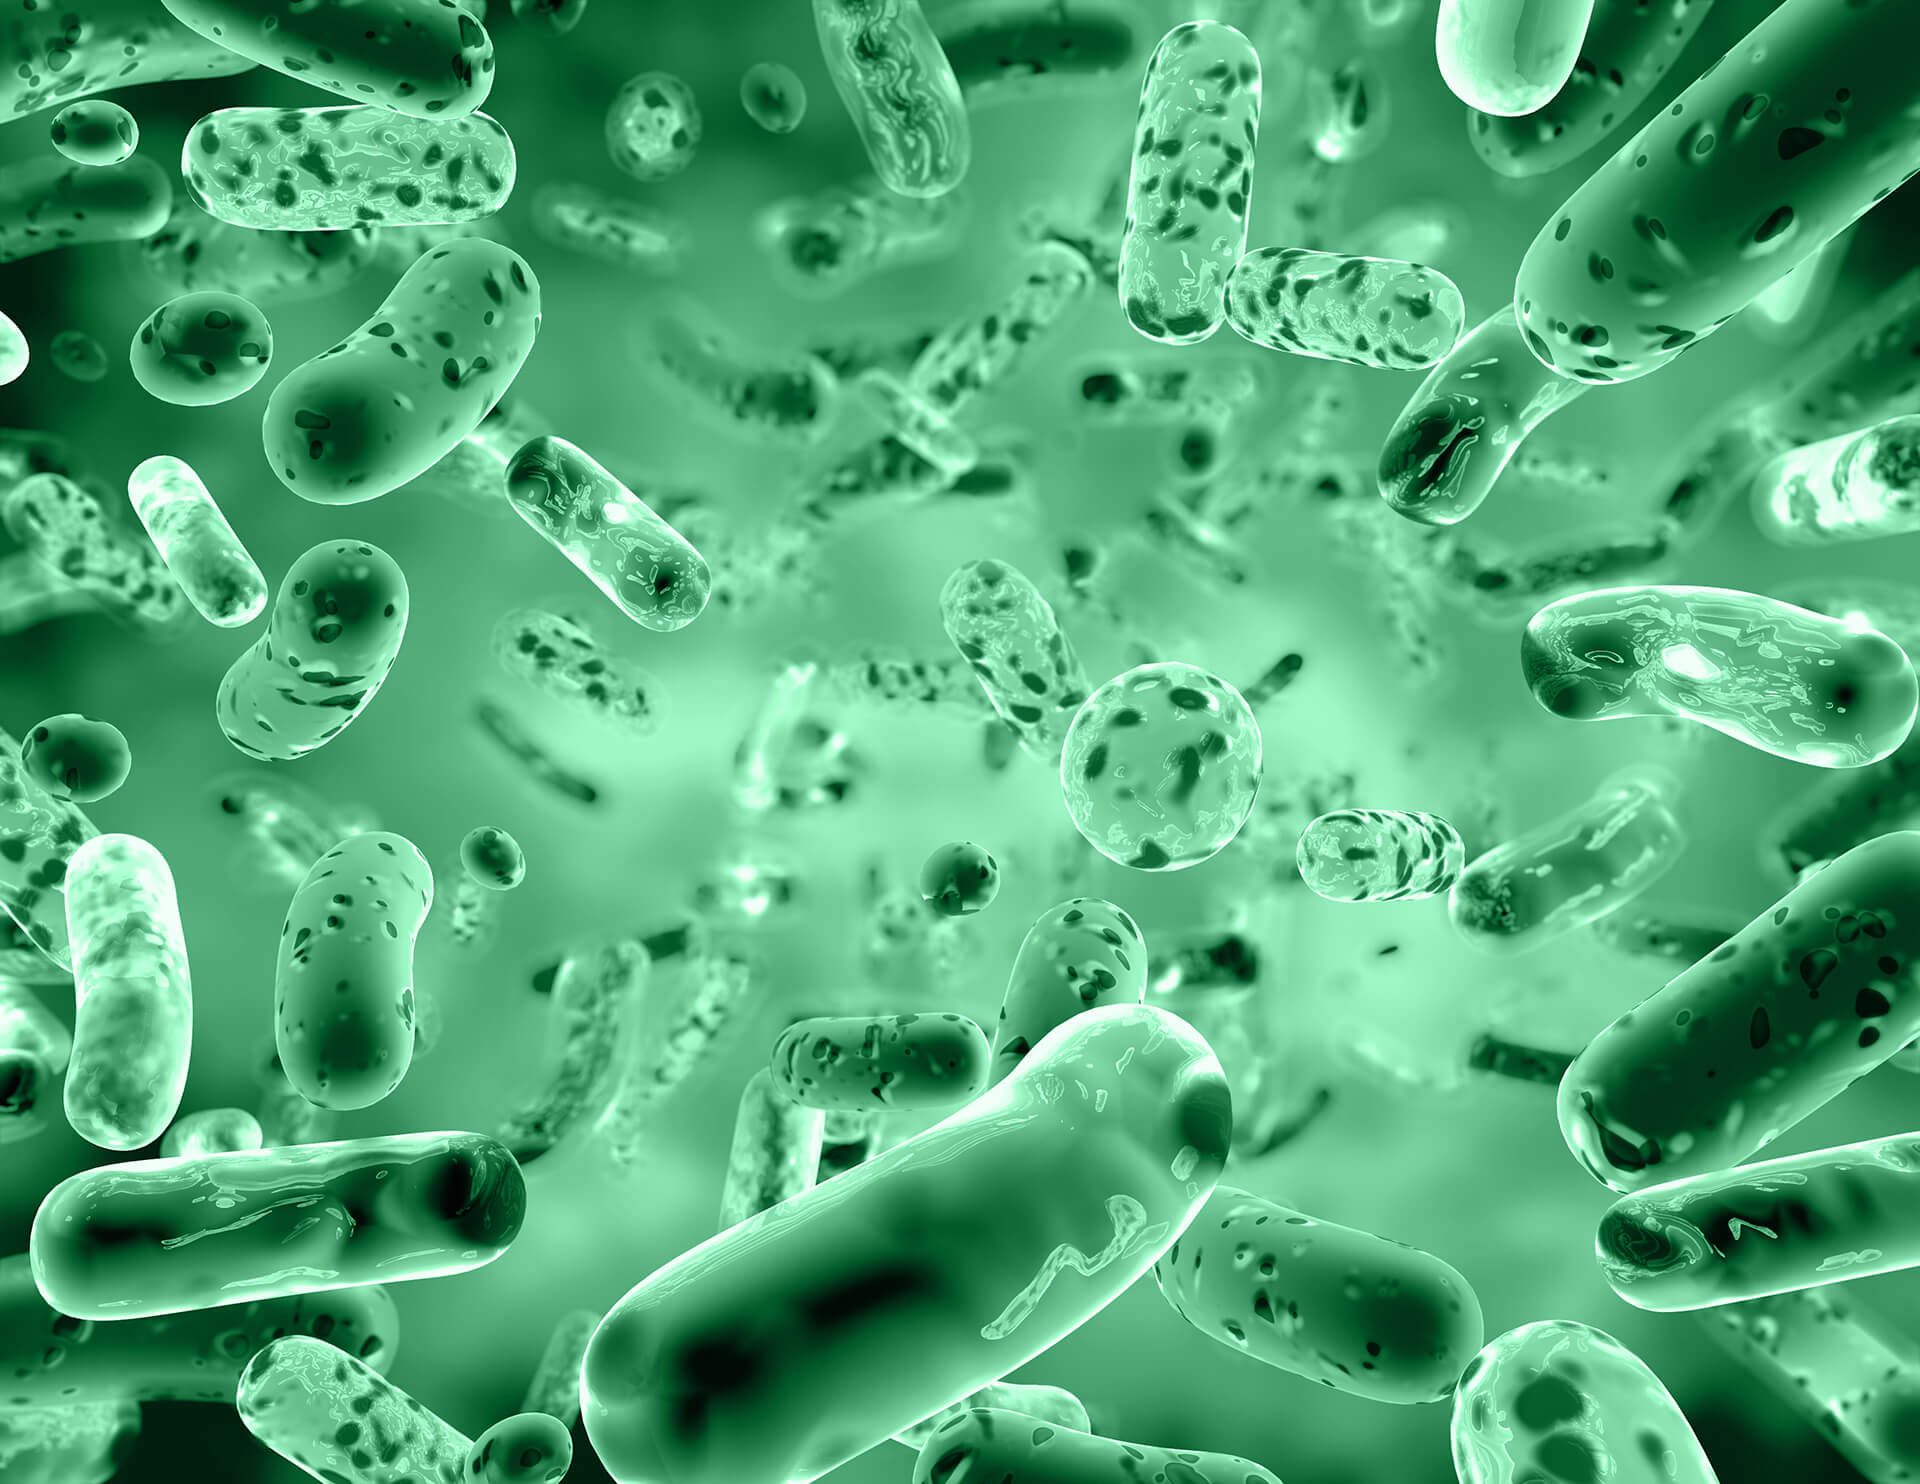 wastewater bacteria